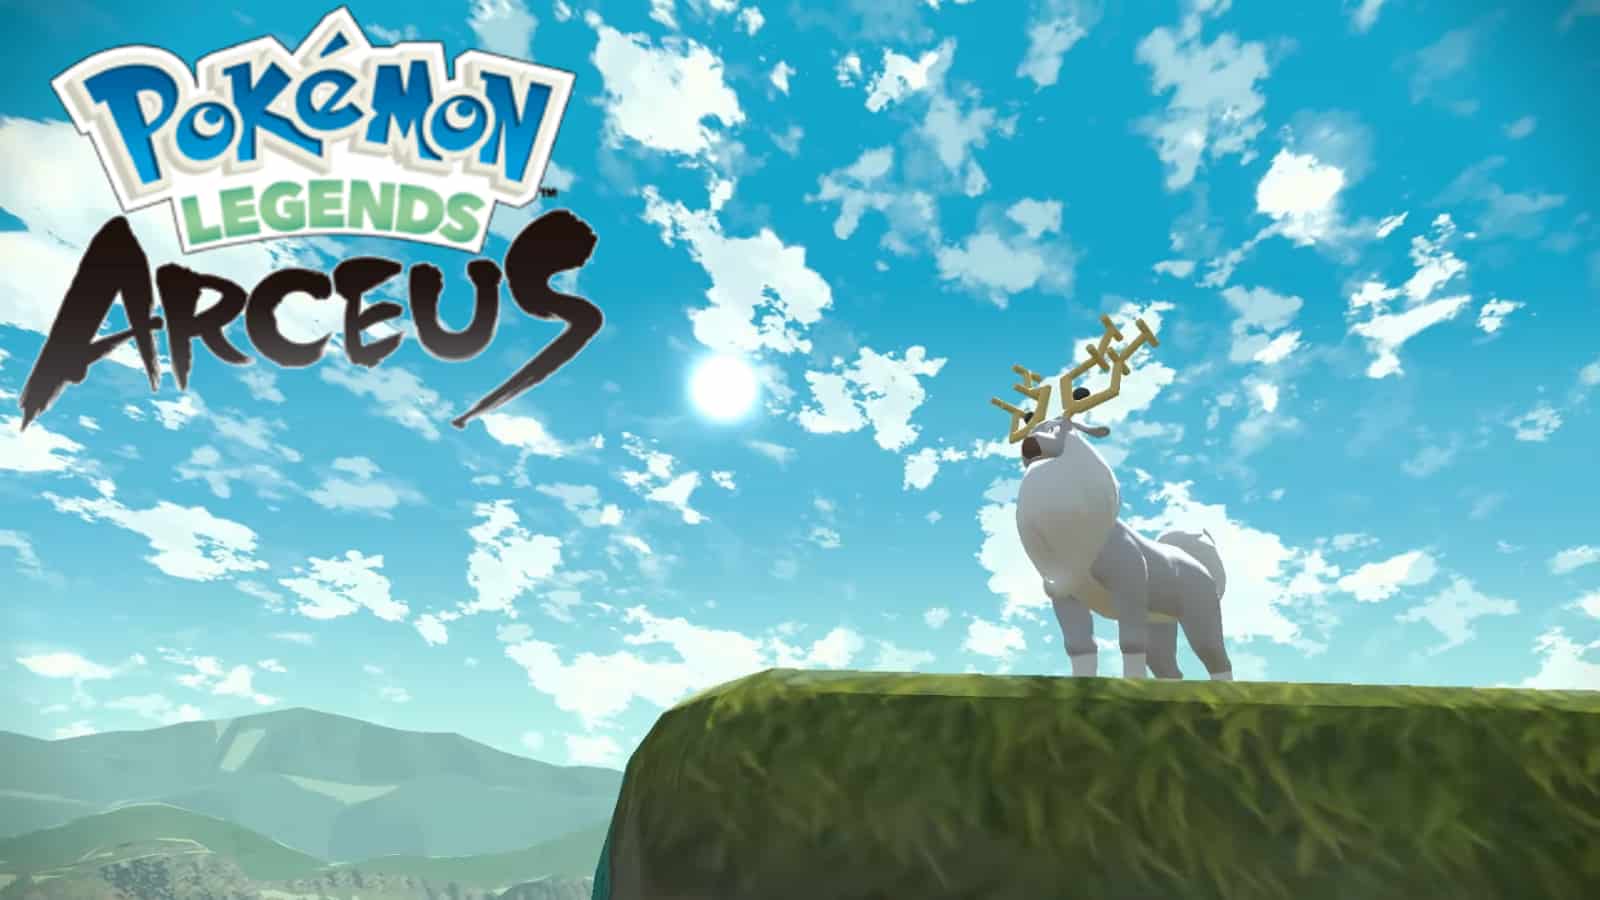 Pokemon Legends Arceus is changing the franchise in a major way